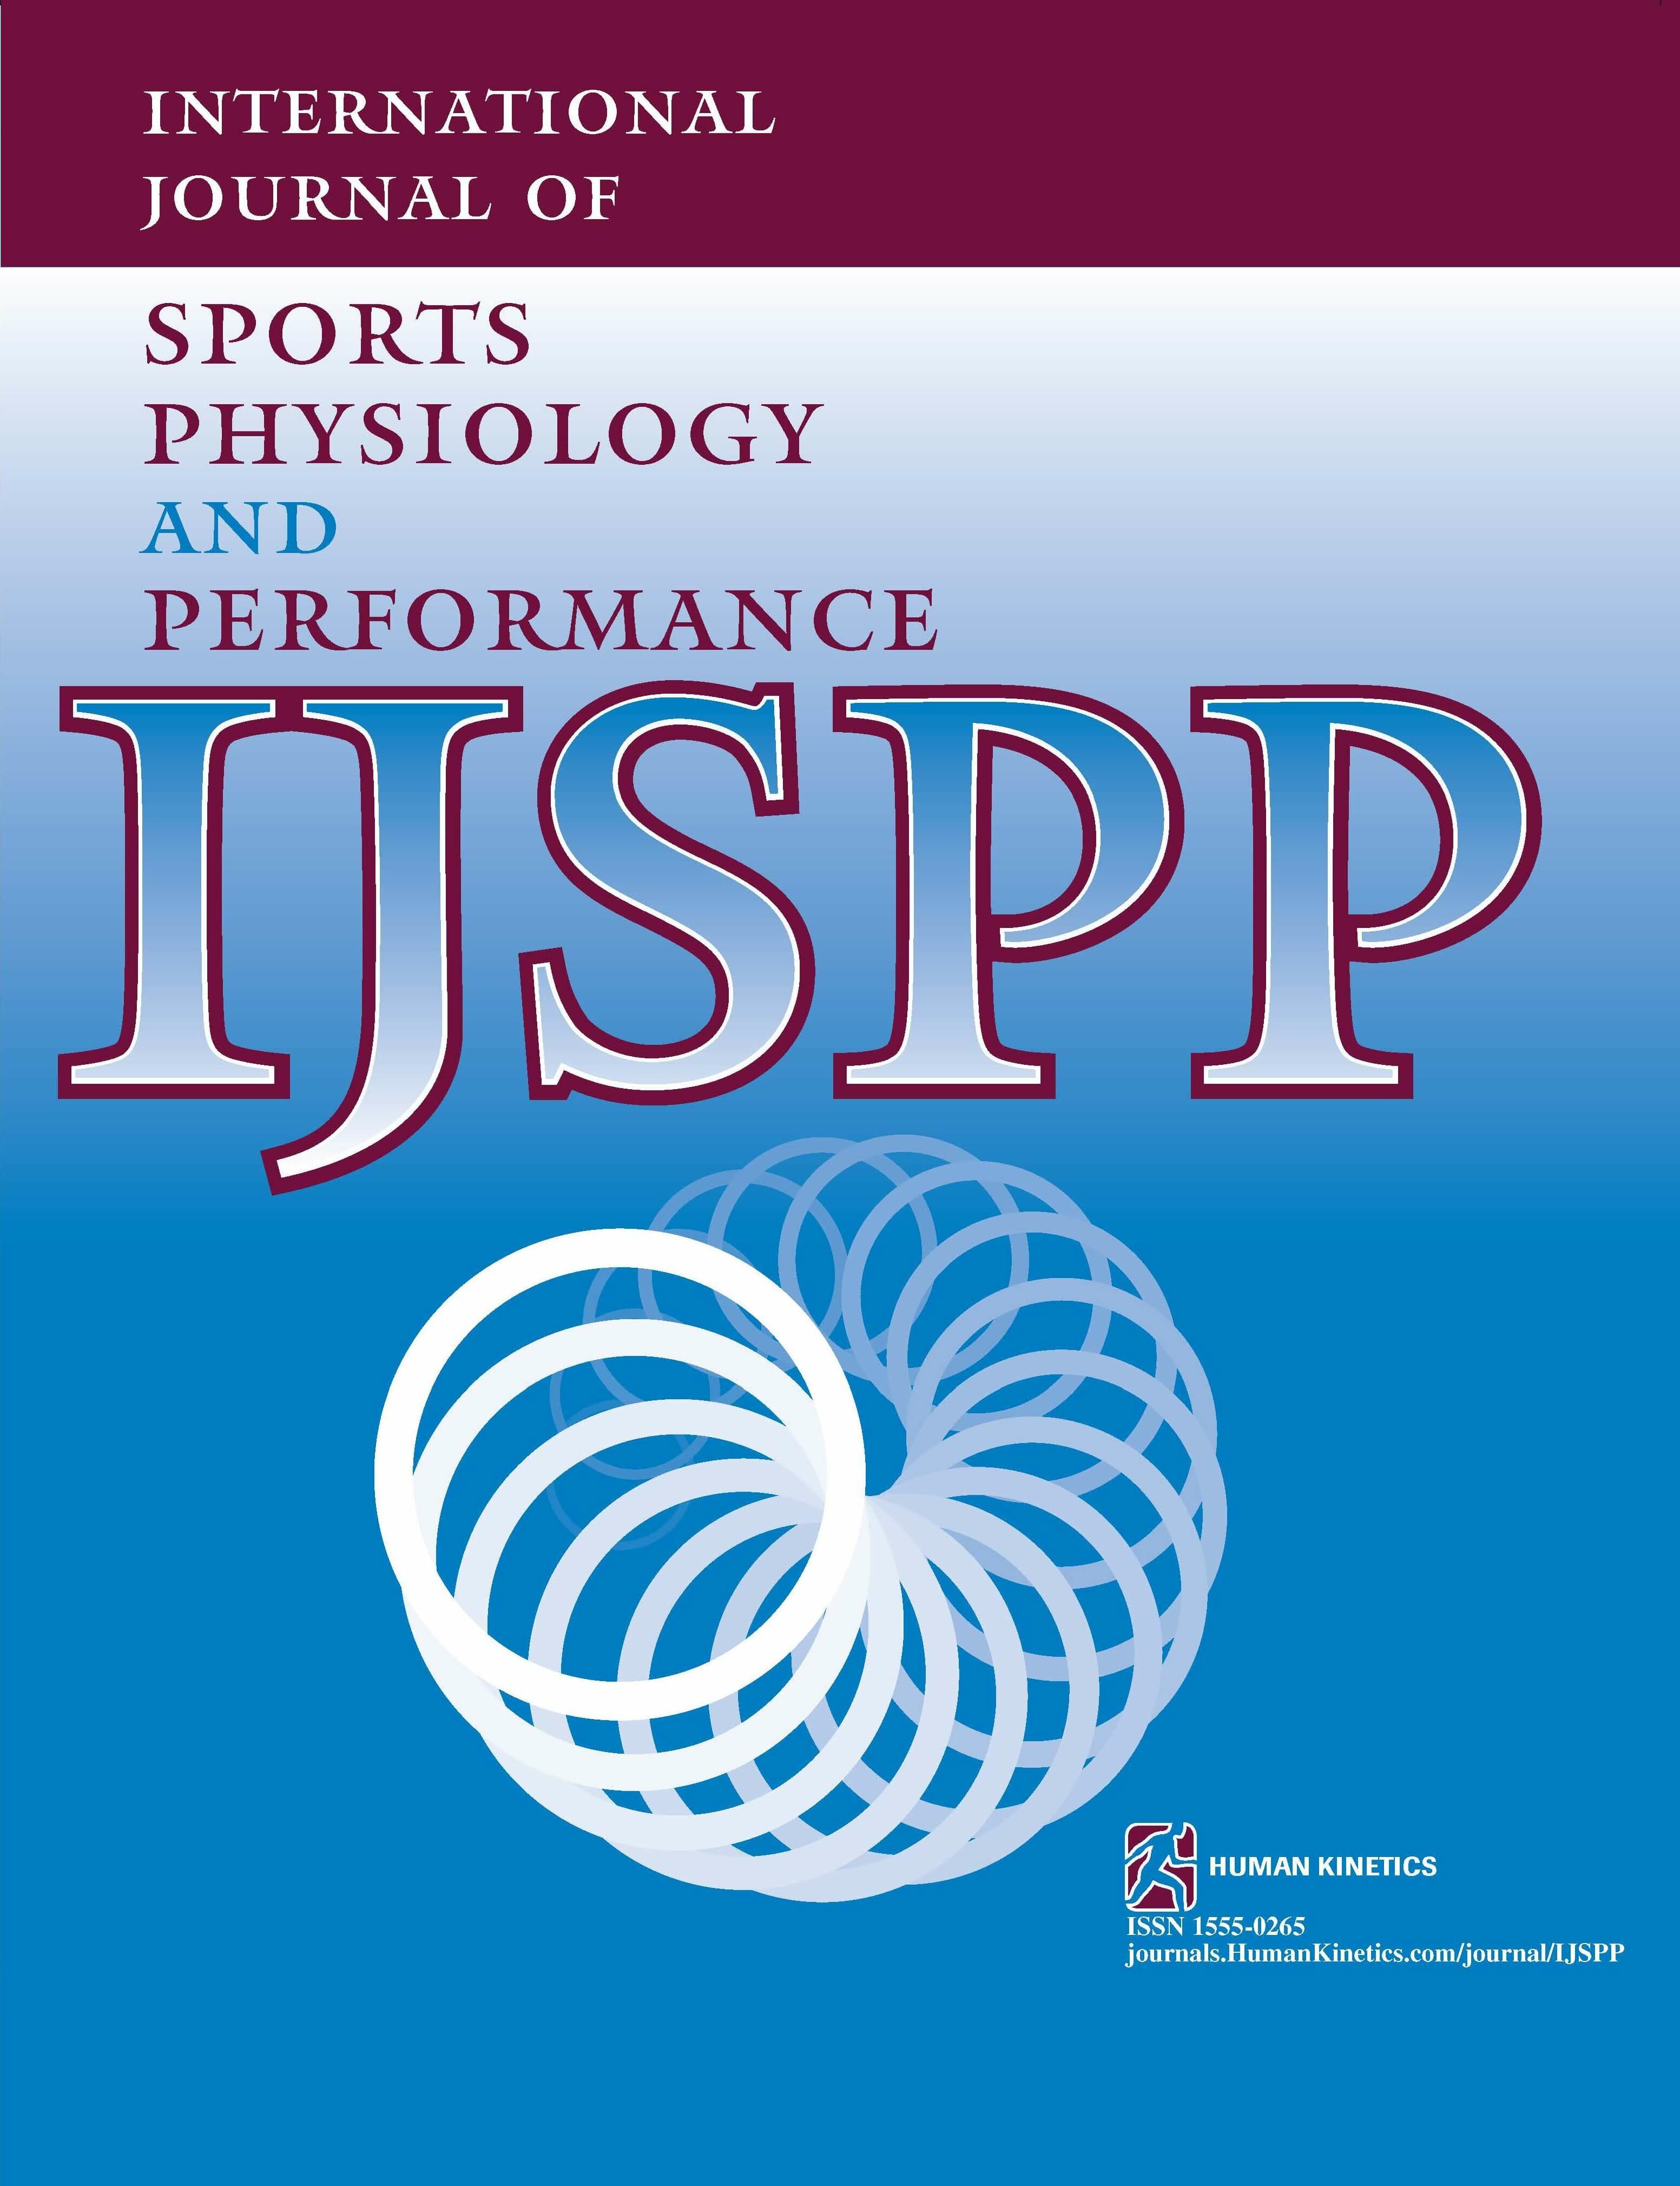 Performance Management in Elite Football: A Teamwork Modeling Approach